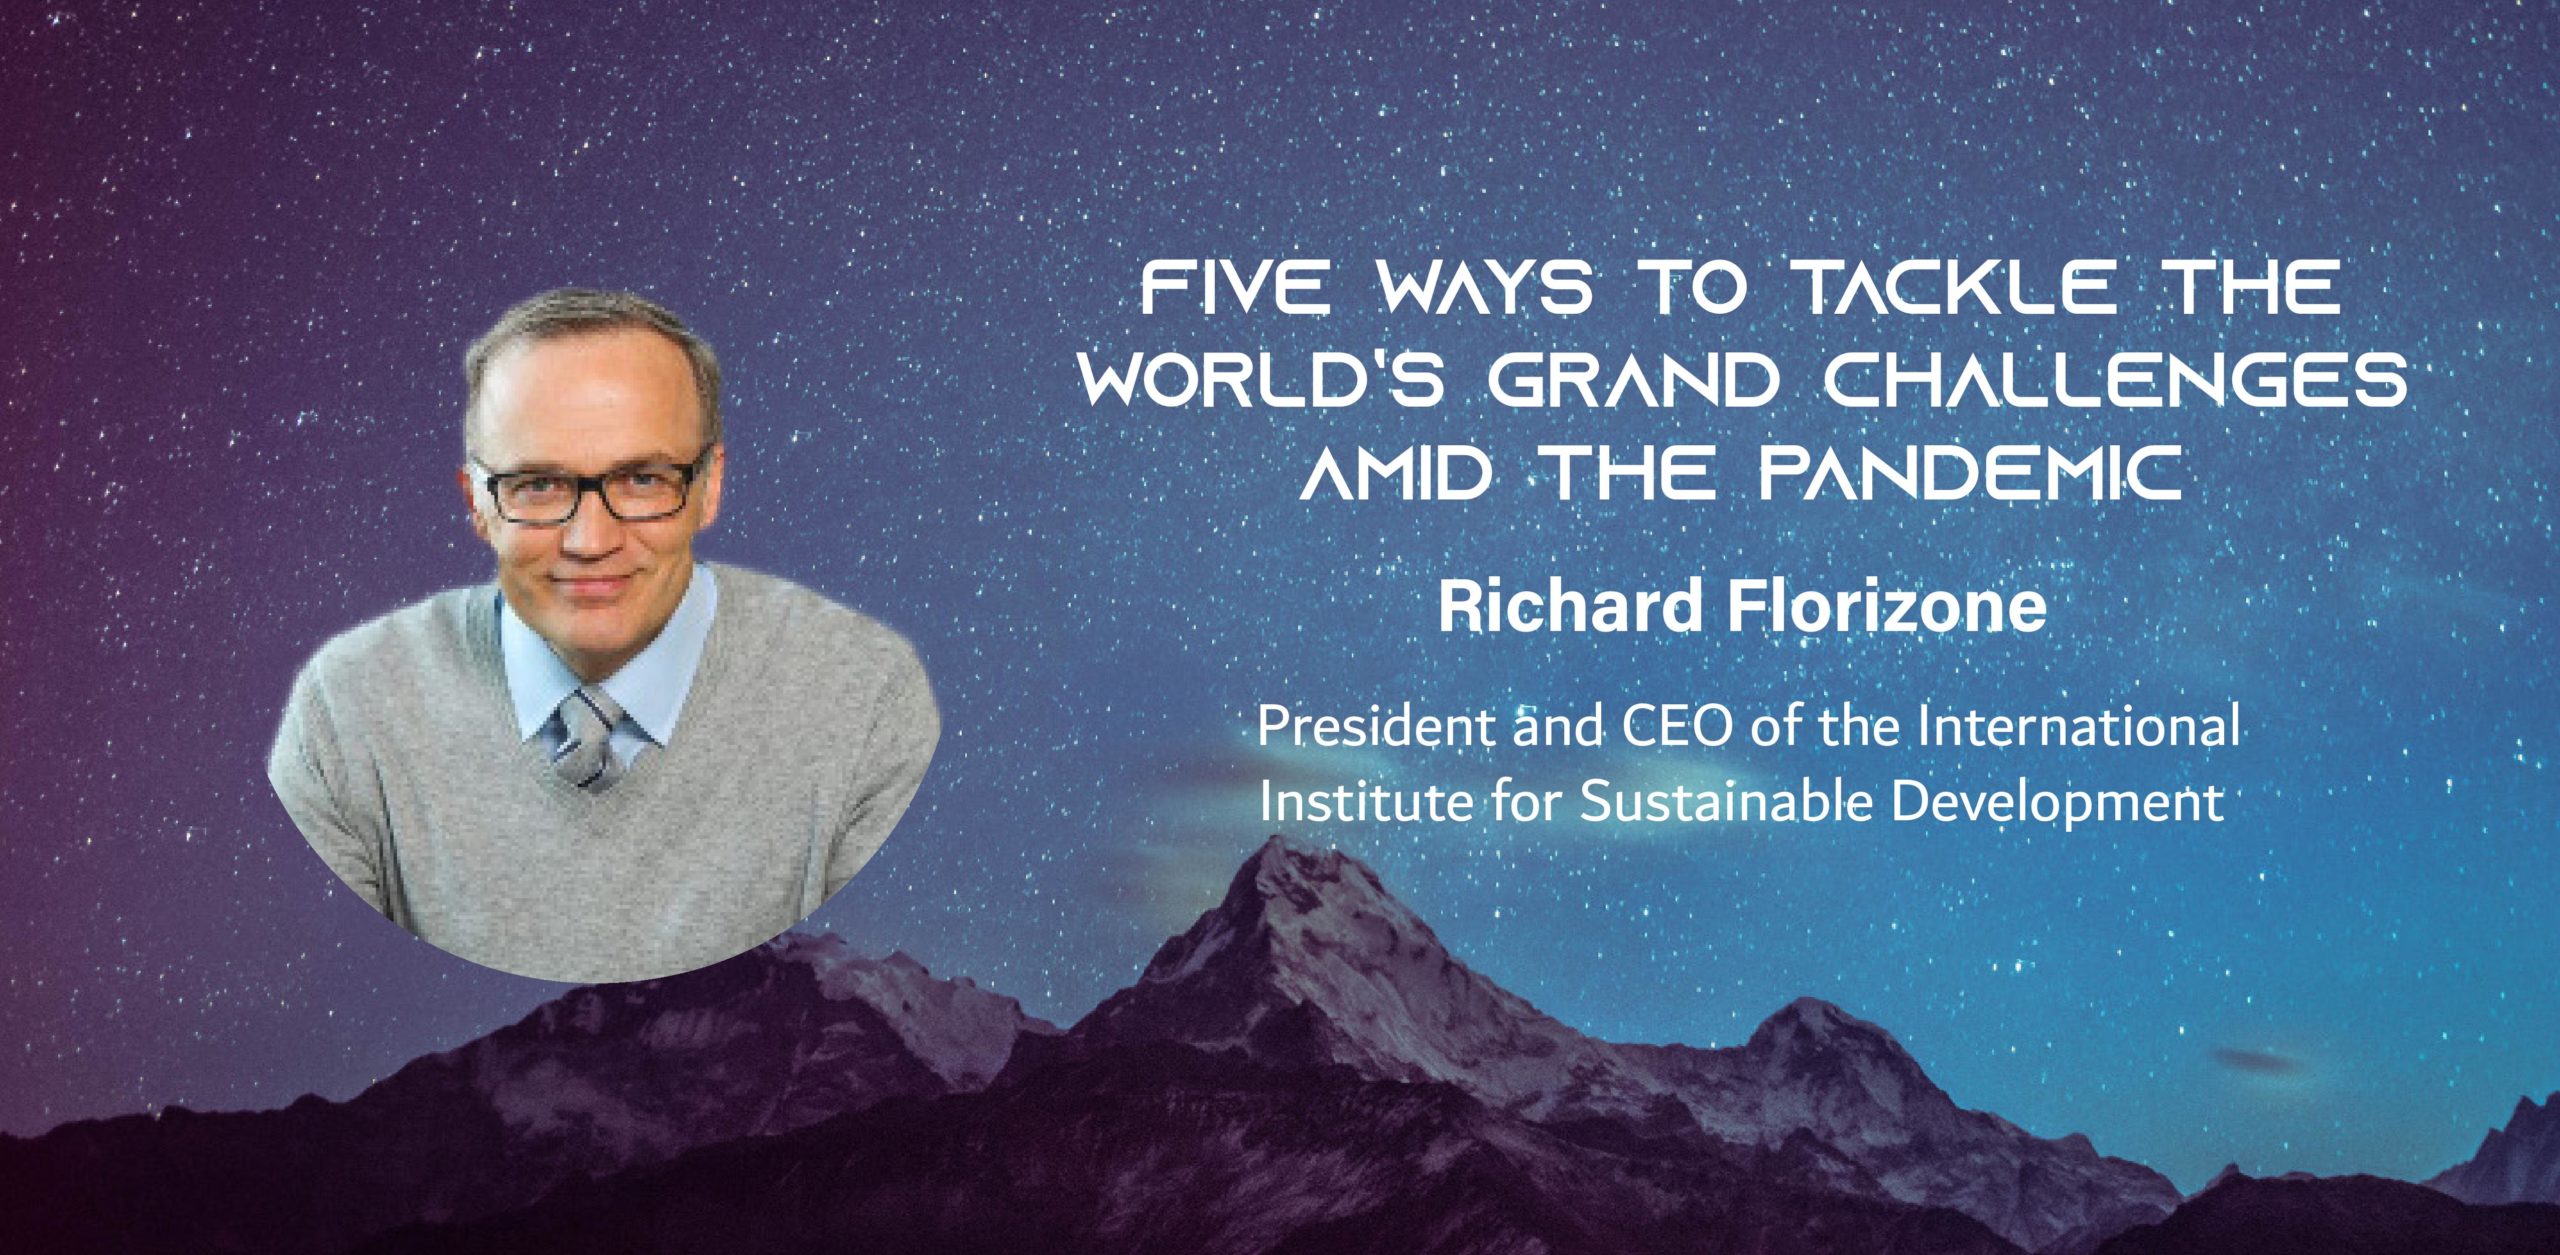 A photo of a man with glasses on a picture of a distand mountain with the text: Five Ways to Tackle the World’s Grand Challenges Amid the Pandemic Richard Florizone President and CEO of the International Institute for Sustainable Development